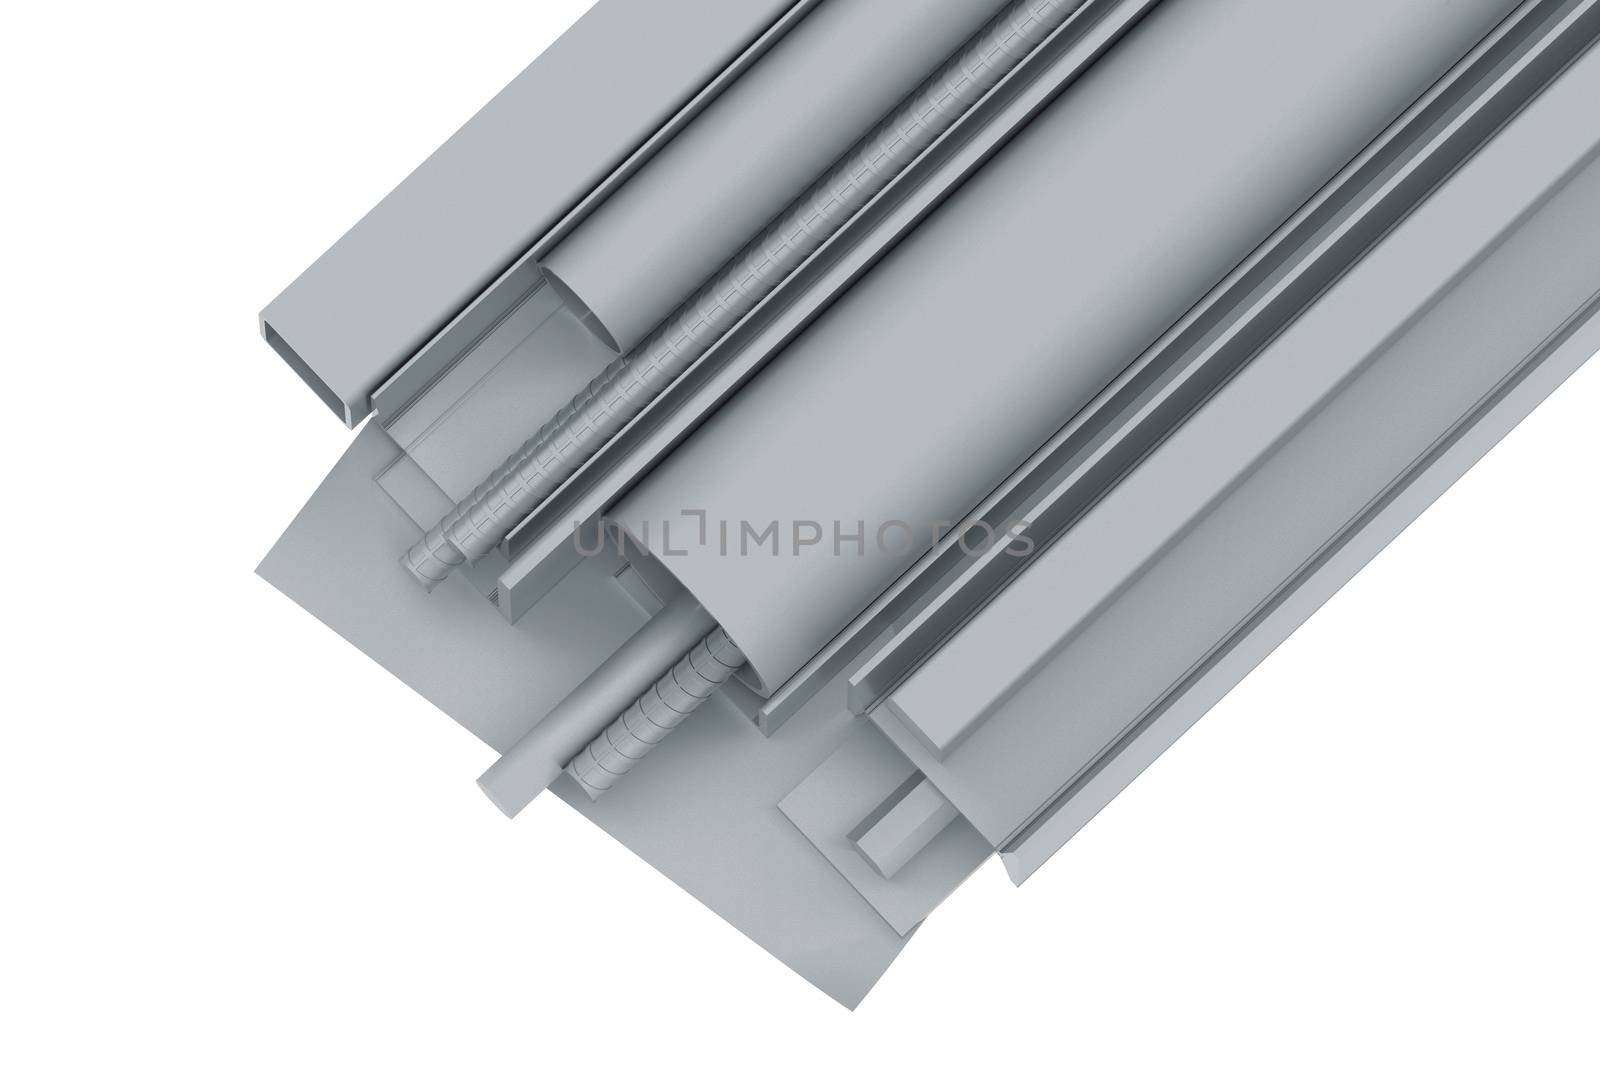 Rolled metal pipes, angles, channels, fixtures and sheet. 3d render